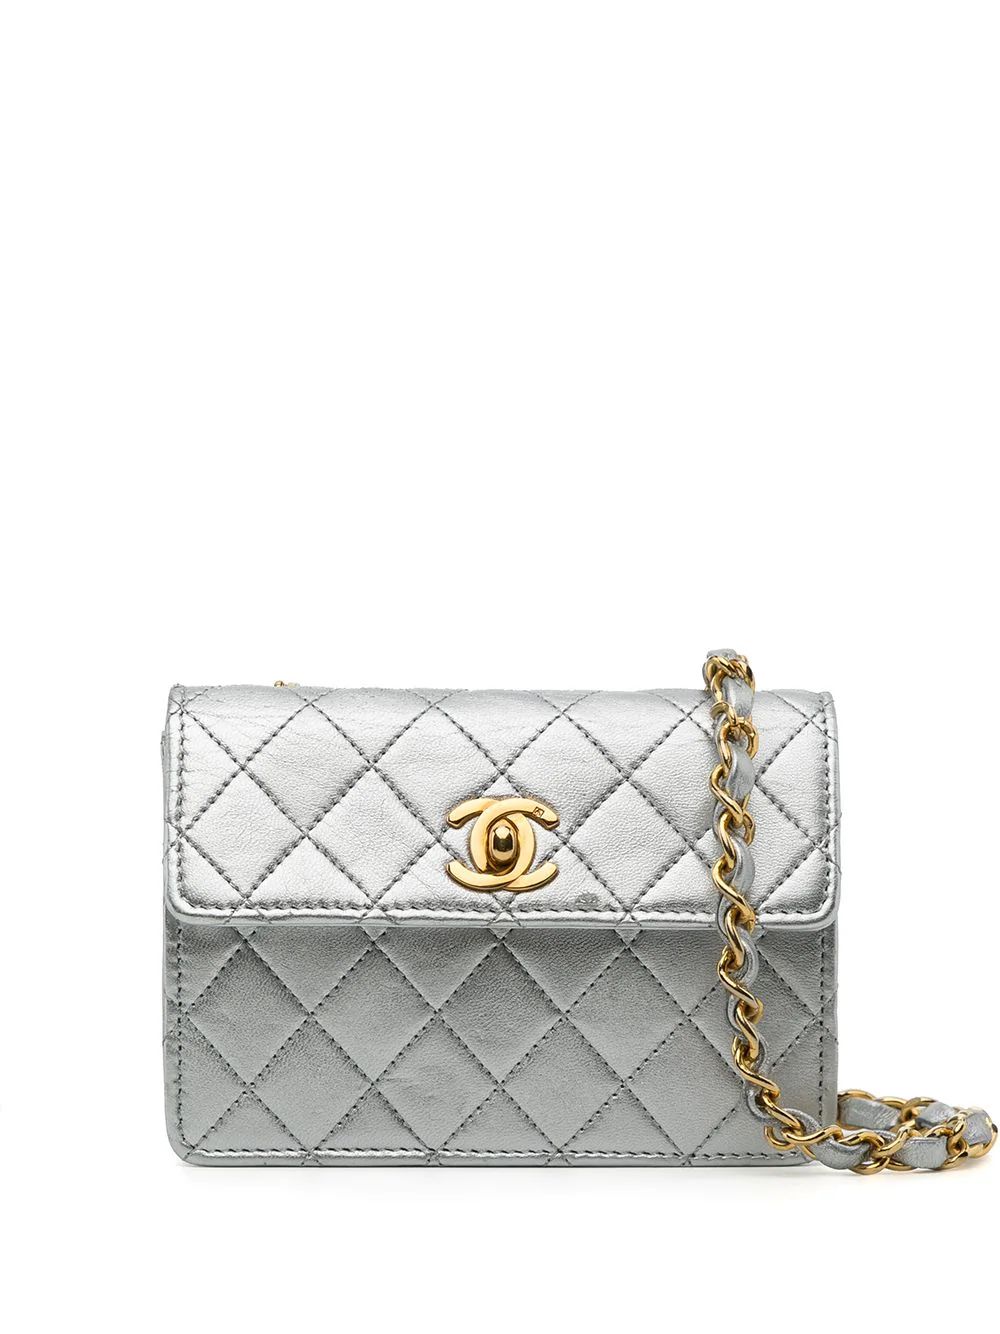 CHANEL Pre-Owned 1990s diamond-quilted Mini Bag - Farfetch | Farfetch Global